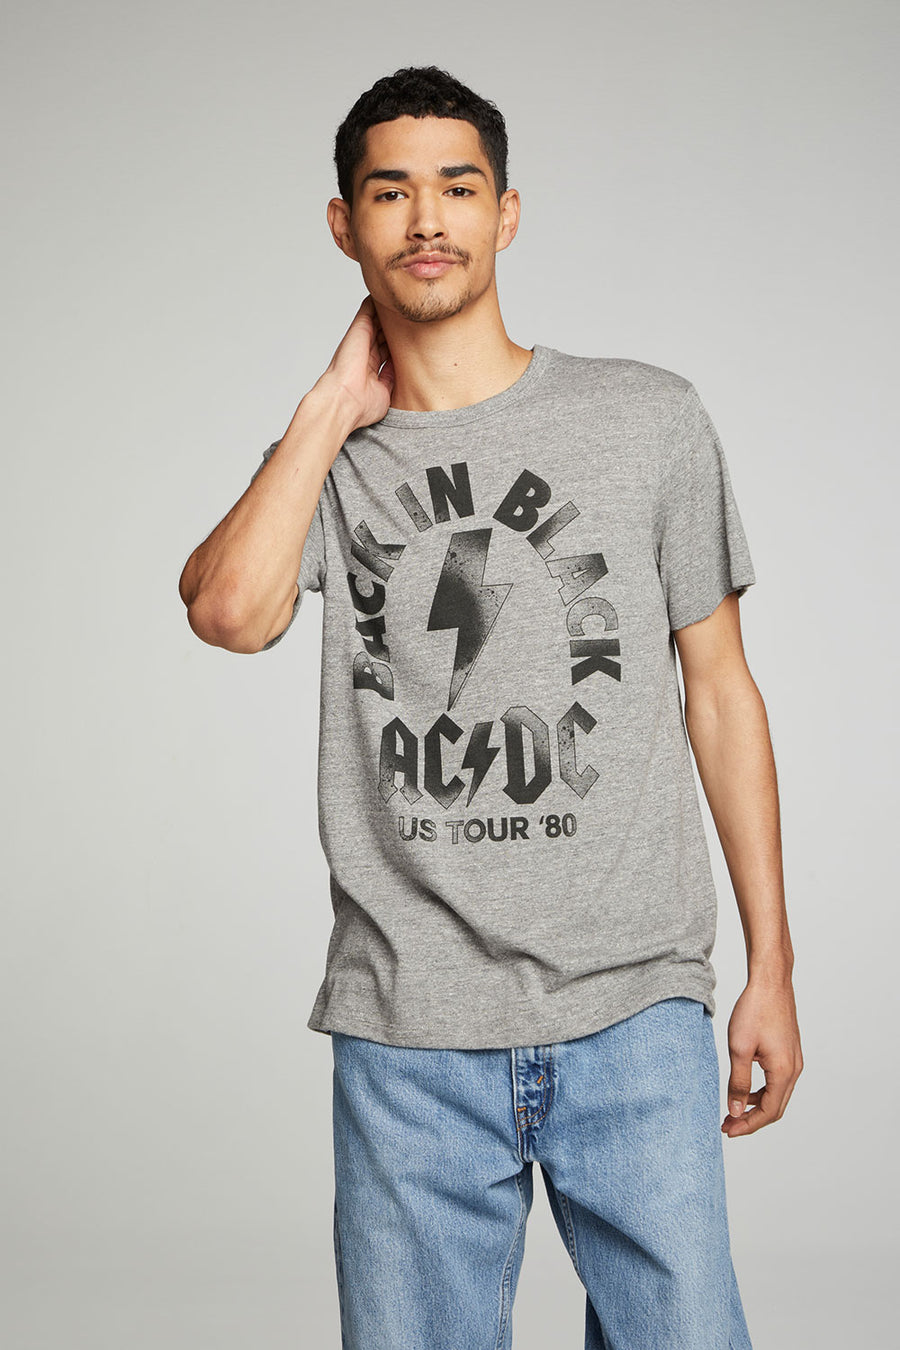 AC/DC - Back In Black MENS chaserbrand